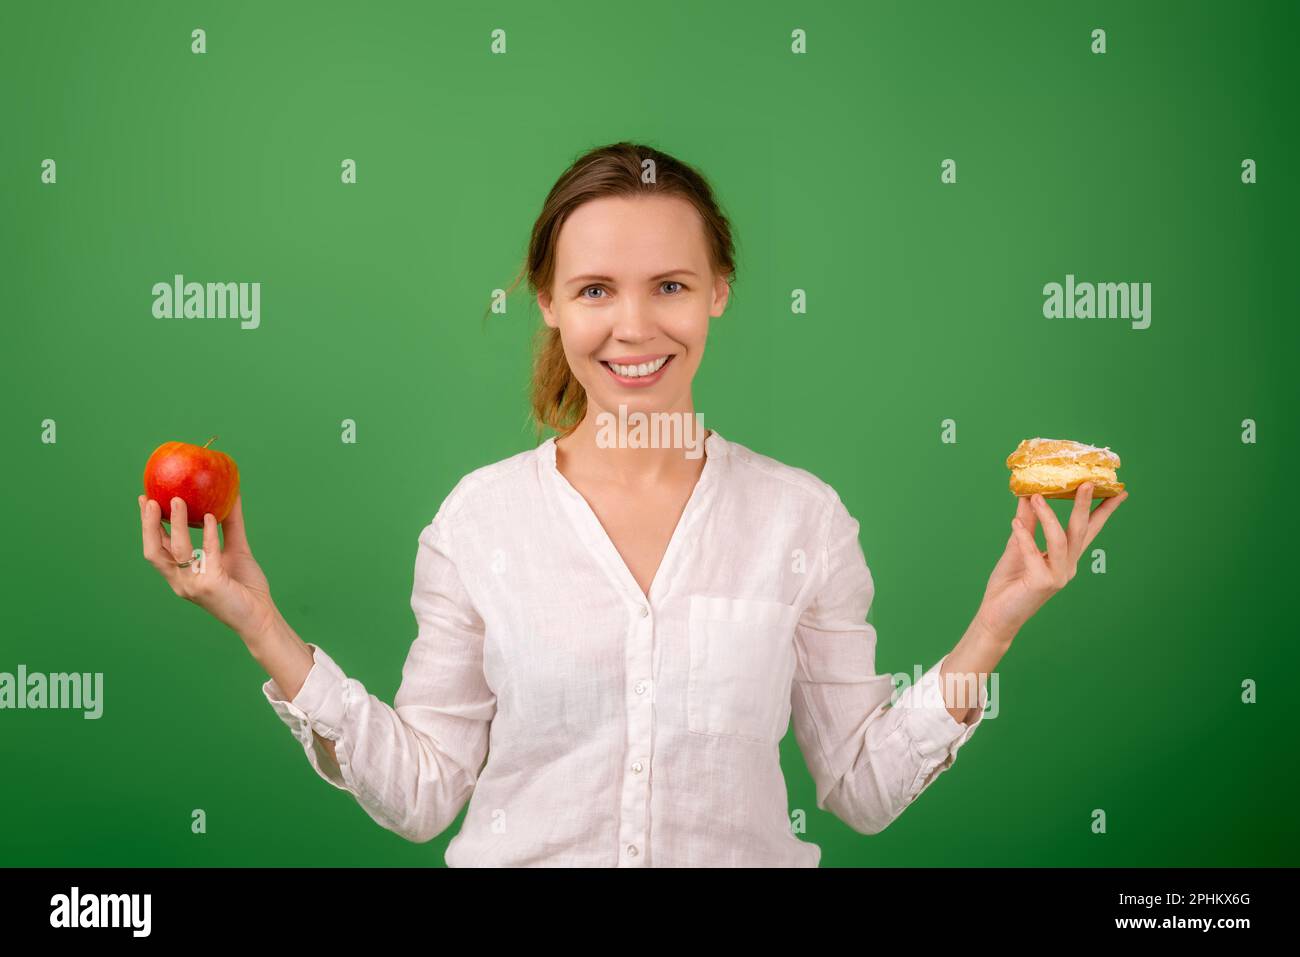 Woman With Four Arms Holding Fruit And Cakes In Each Hand Stock